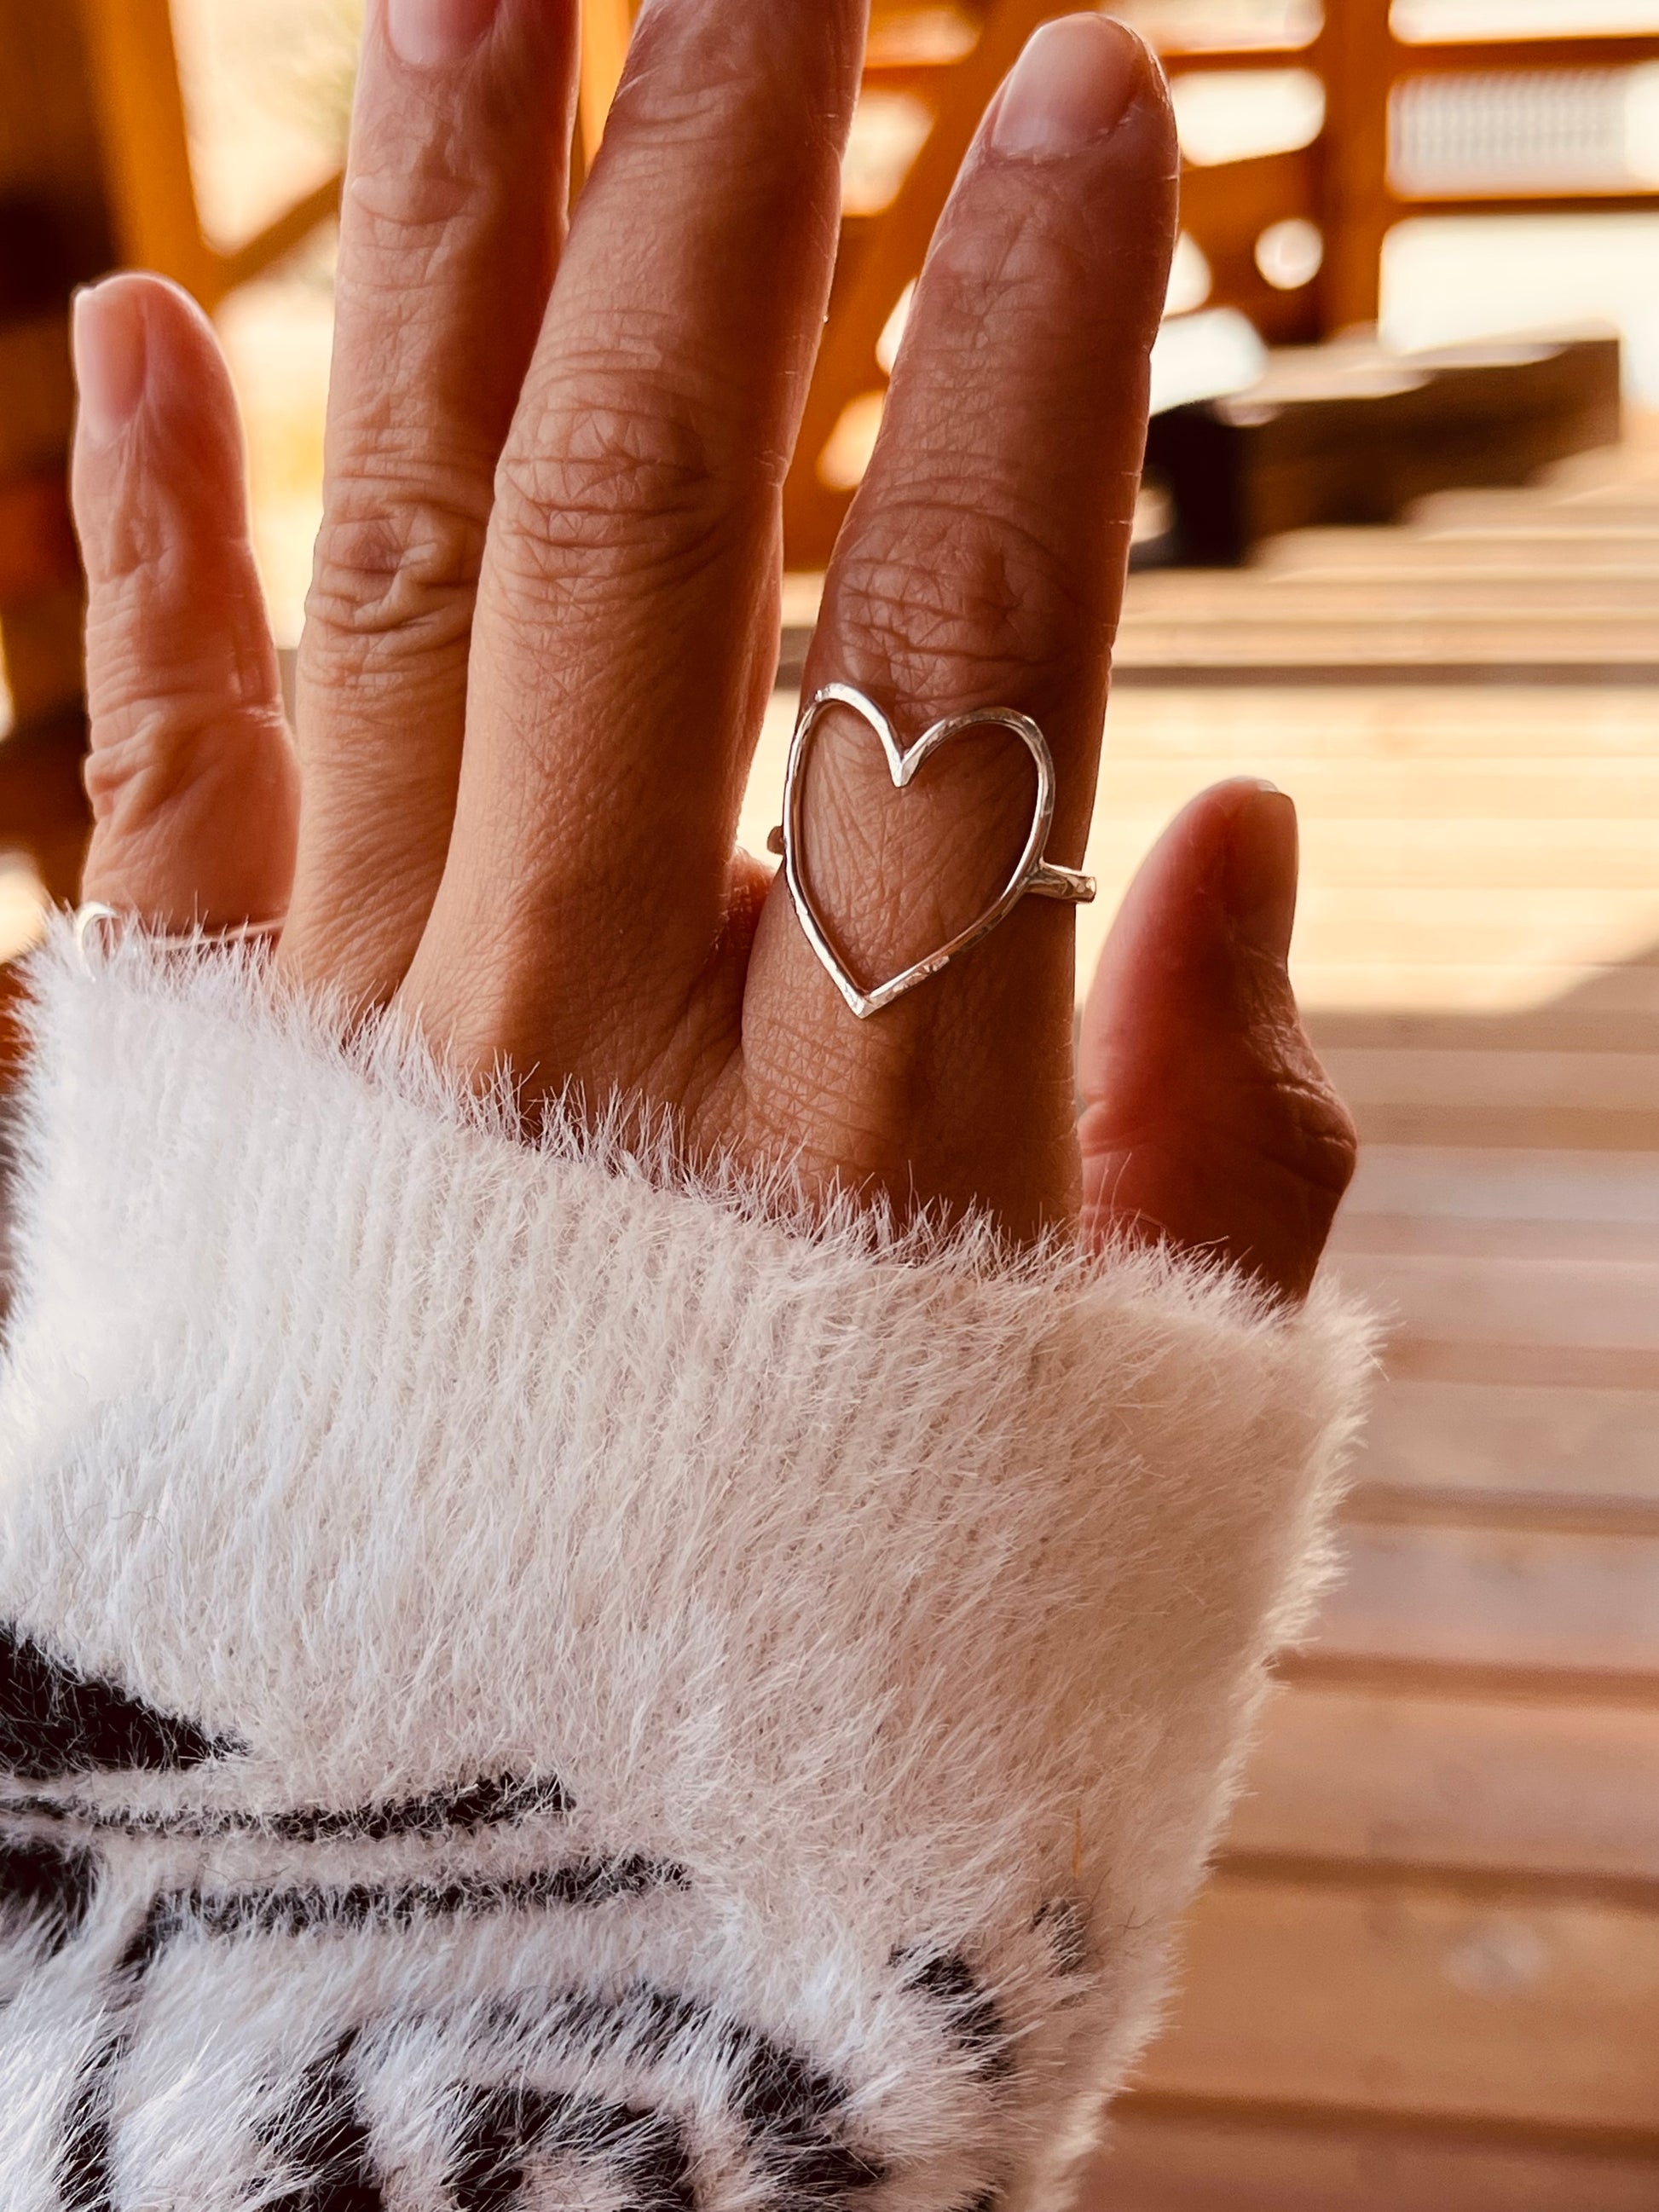 Large Open Heart Ring, Statement Rings, Stacking Rings, Stackable Rings, Dainty Rings, Delicate Rings, Heart, Best Friends Gifts, Friendship Jewelry, Mothers Gift, Wife Gift Ideas,  Grandmothers Gifts